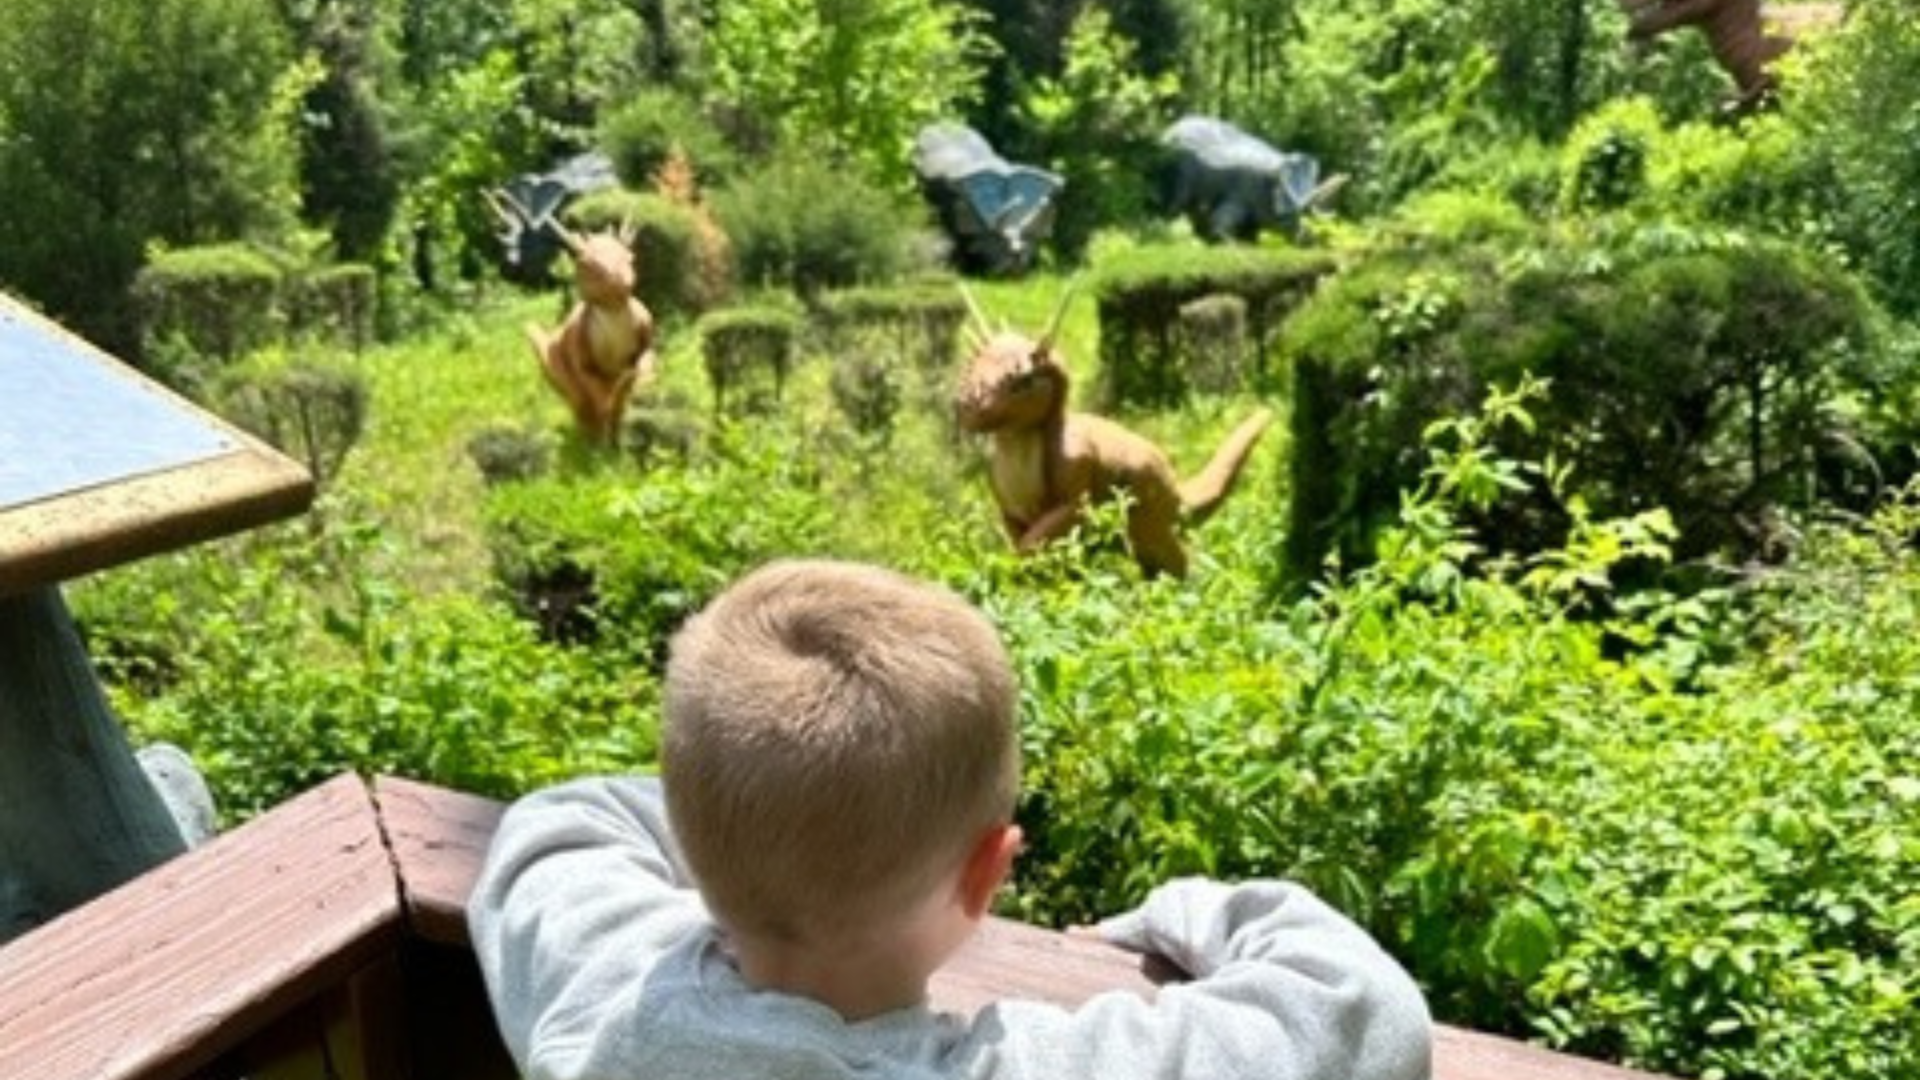 Do You Have A Dino-Loving Child? Add This To Your Summer Bucket List!